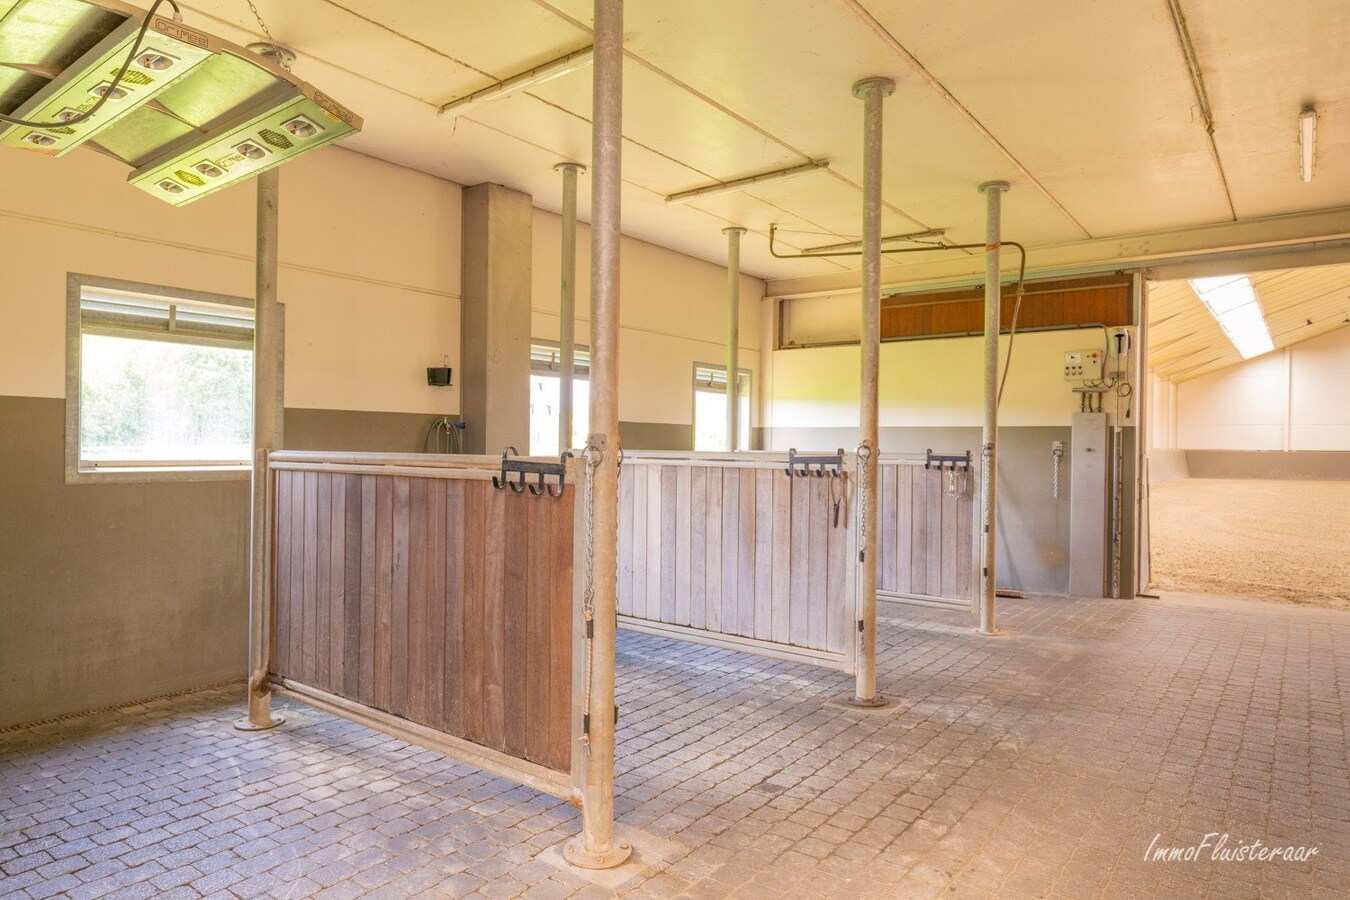 One of a kind equestrian domain on approximately 5.1 hectares. 